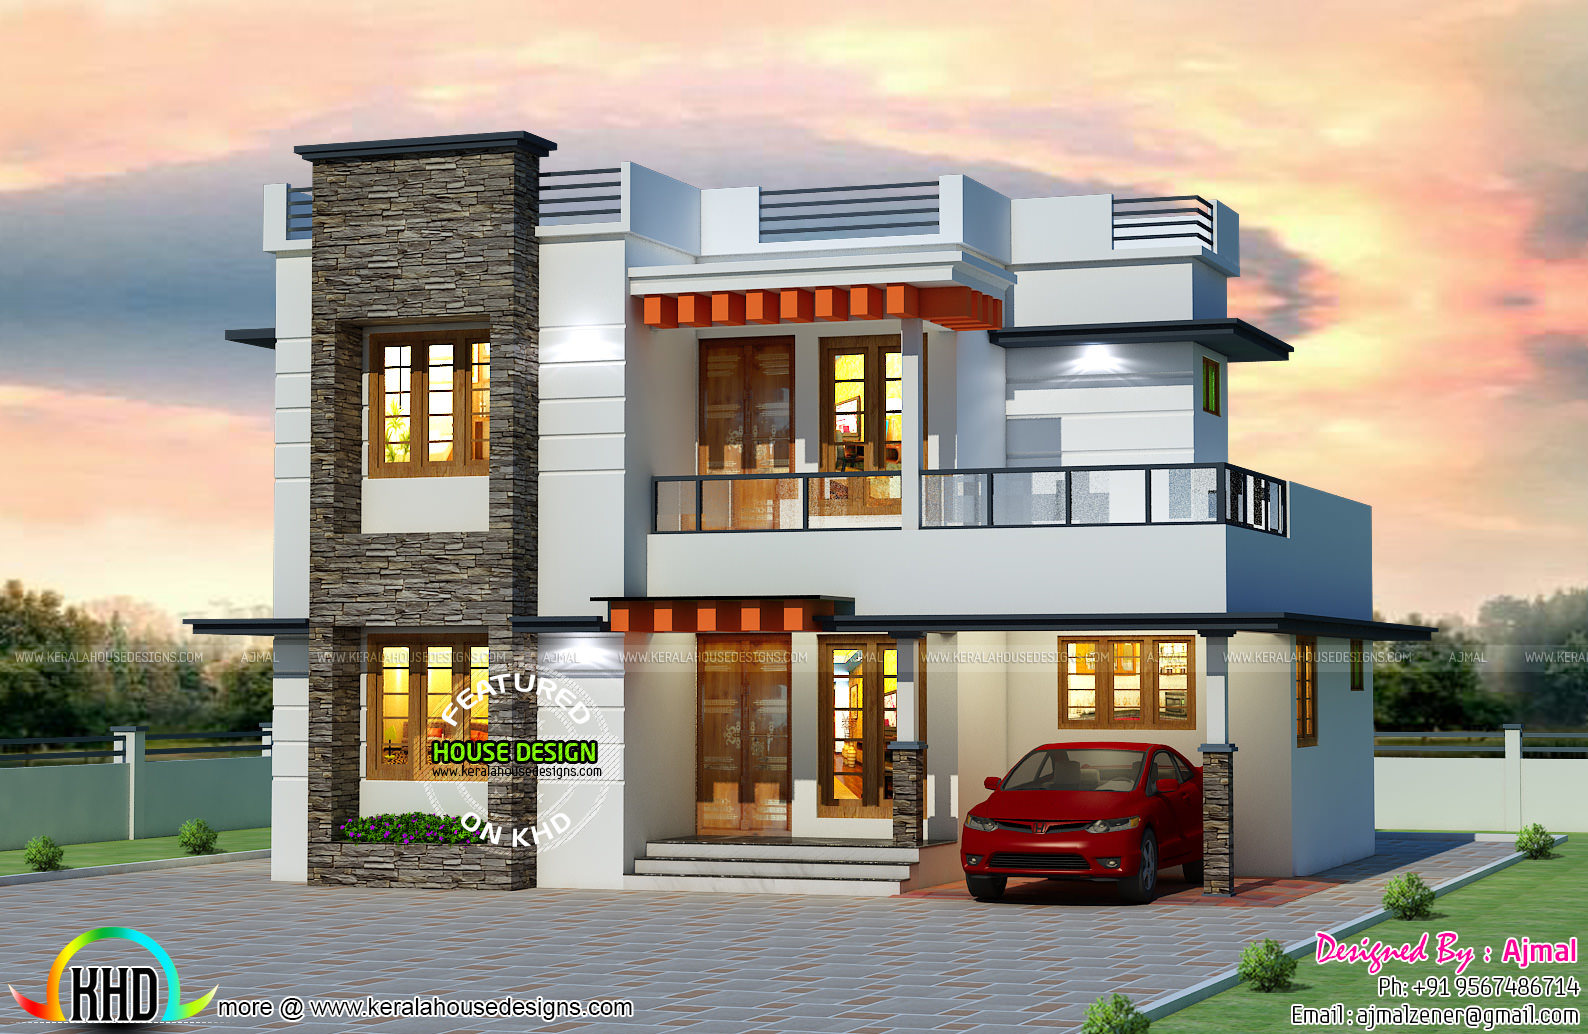 25 Lakhs Cost Estimated Kerala Home Kerala Home Design And Floor Plans 8000 Houses